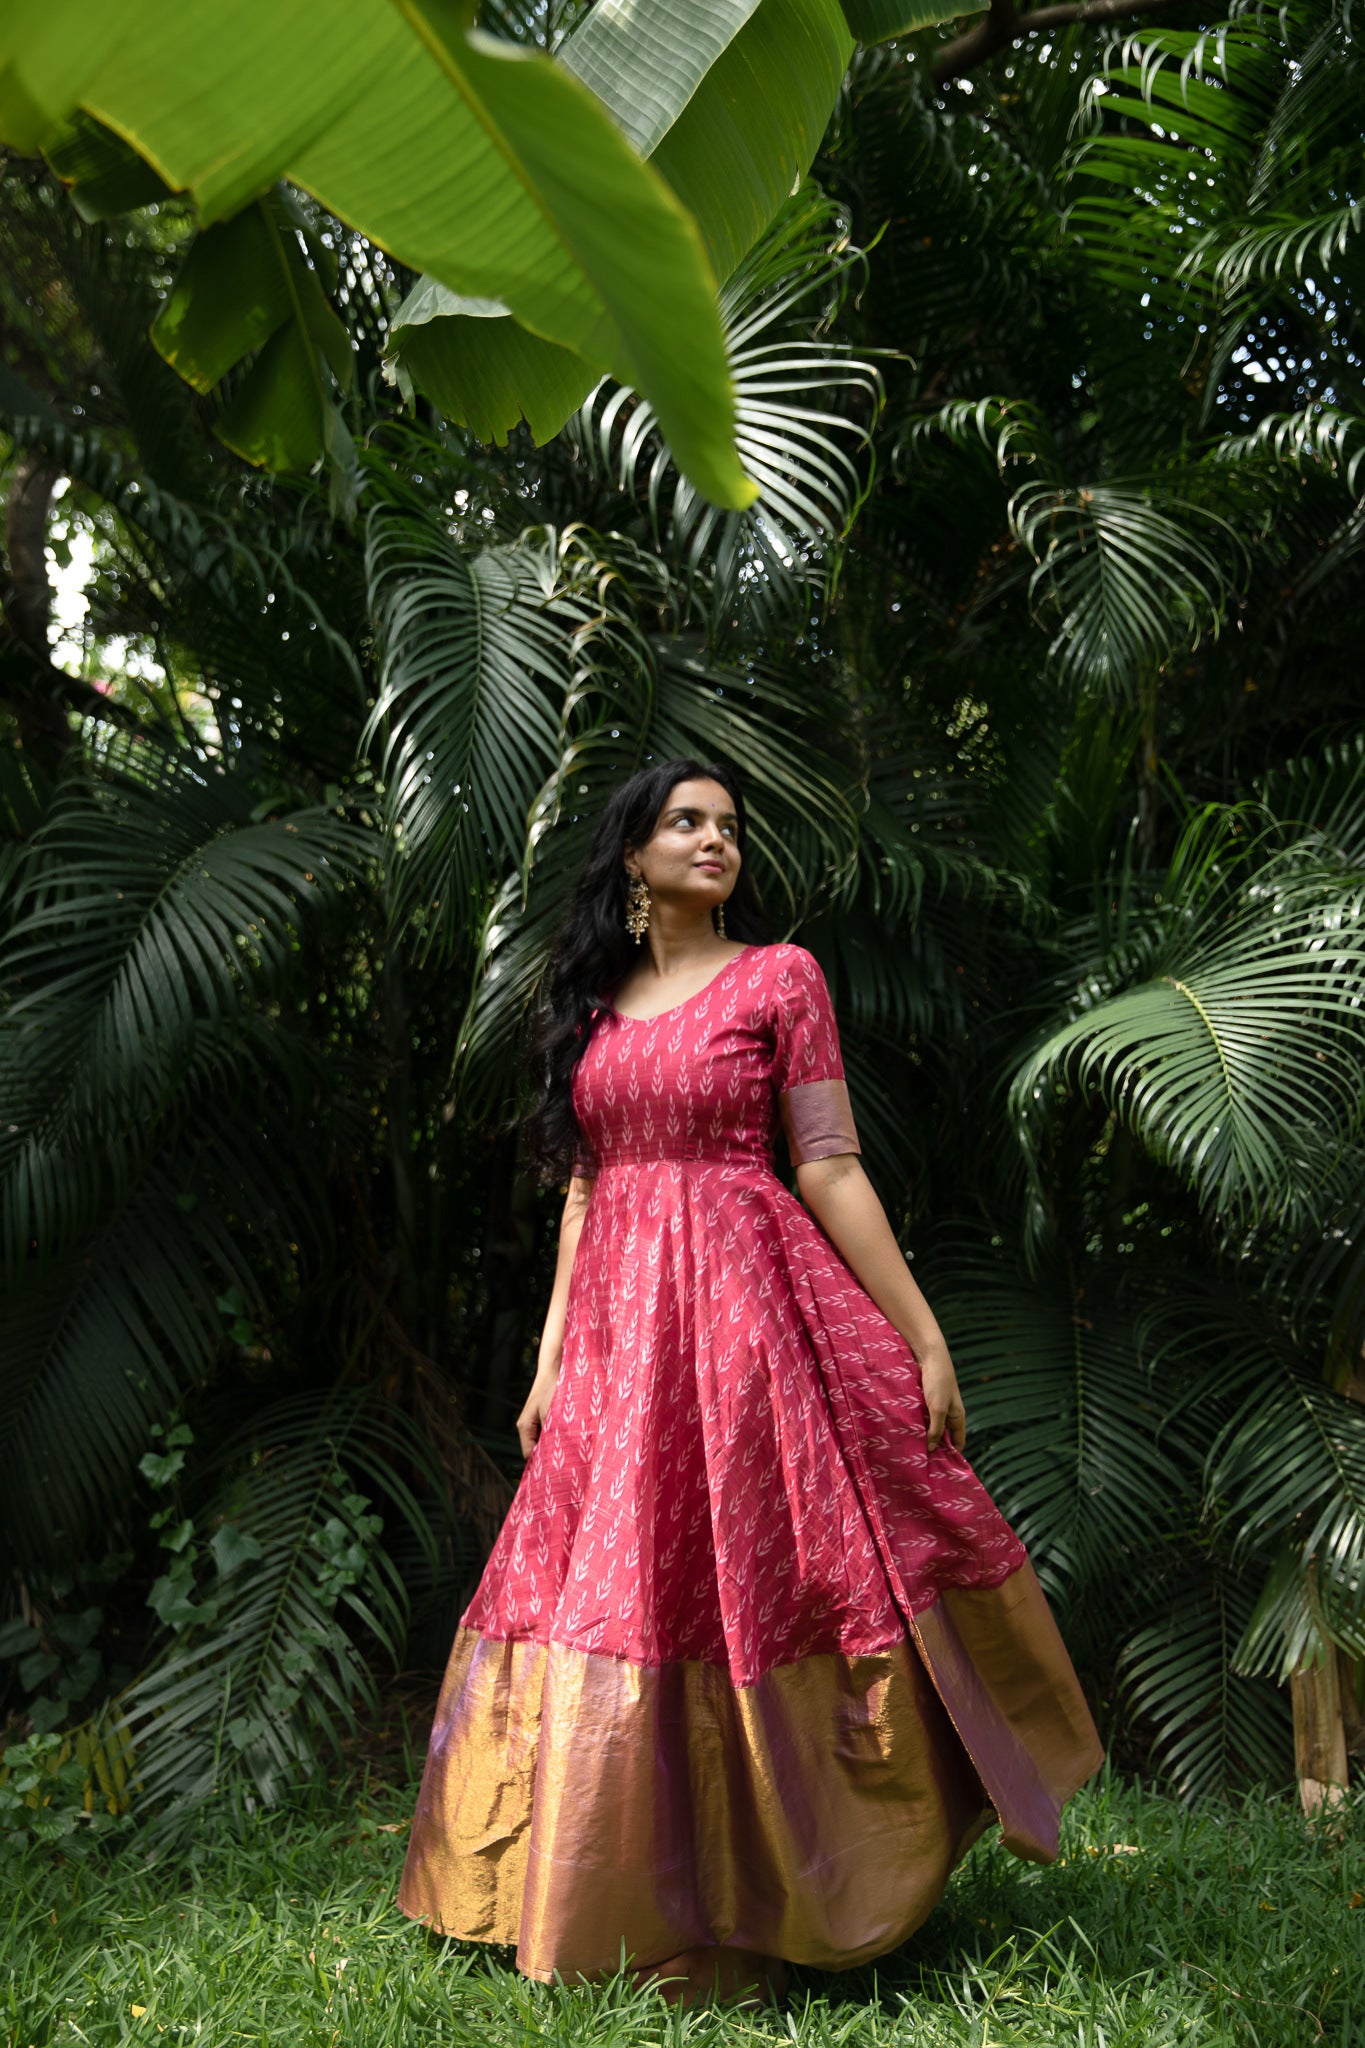 A dress I stitched from Amma s old saree! An outfit from scratch kind of  situation here😅 #sareedress #keraladress #kasavusaree | Instagram